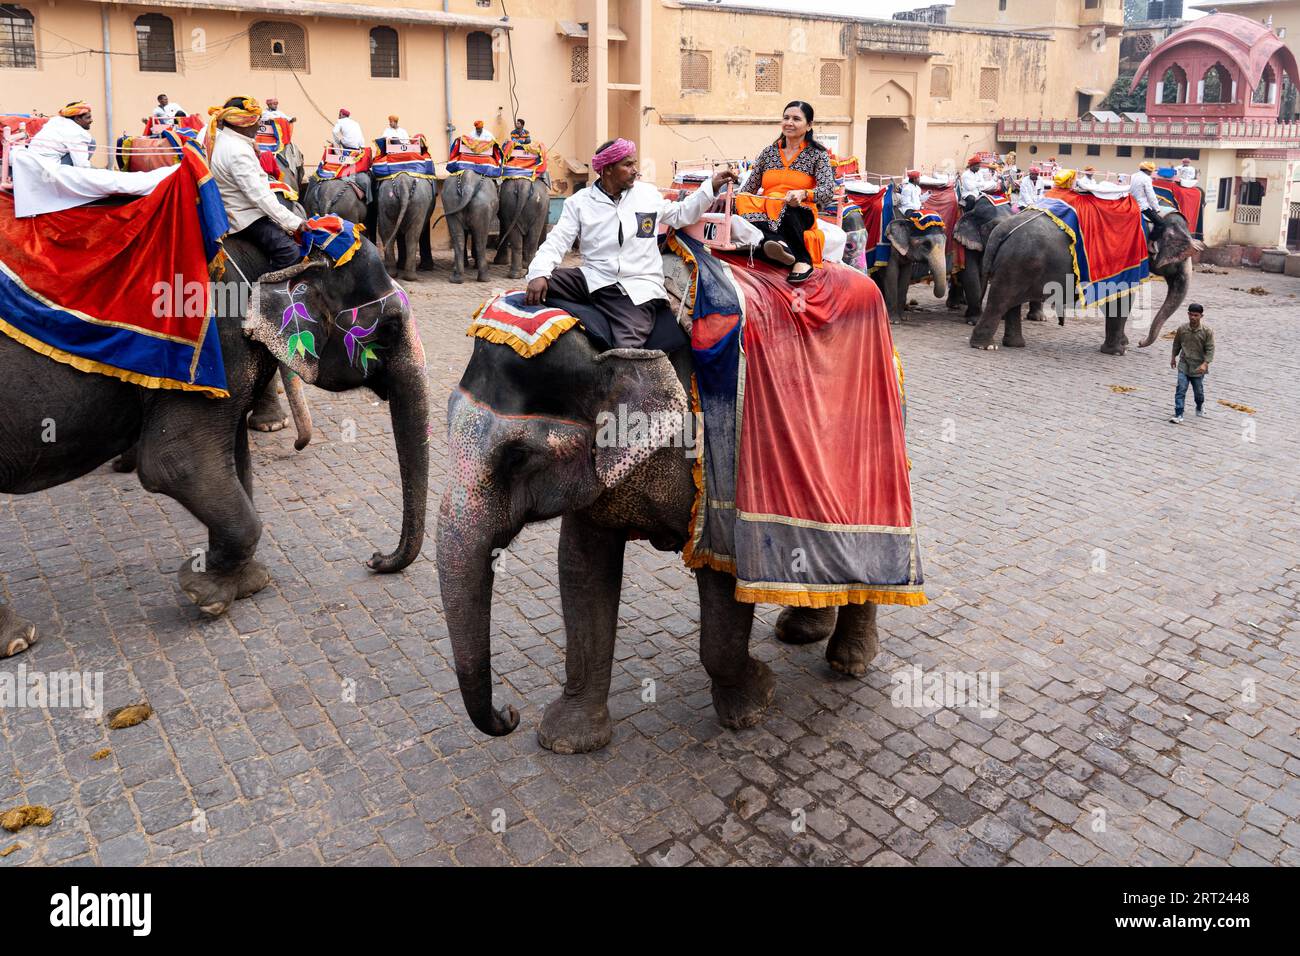 Jaipur, India, December 12, 2019: A tourist beeing carried up to Amber Fort by a decorated elephant Stock Photo